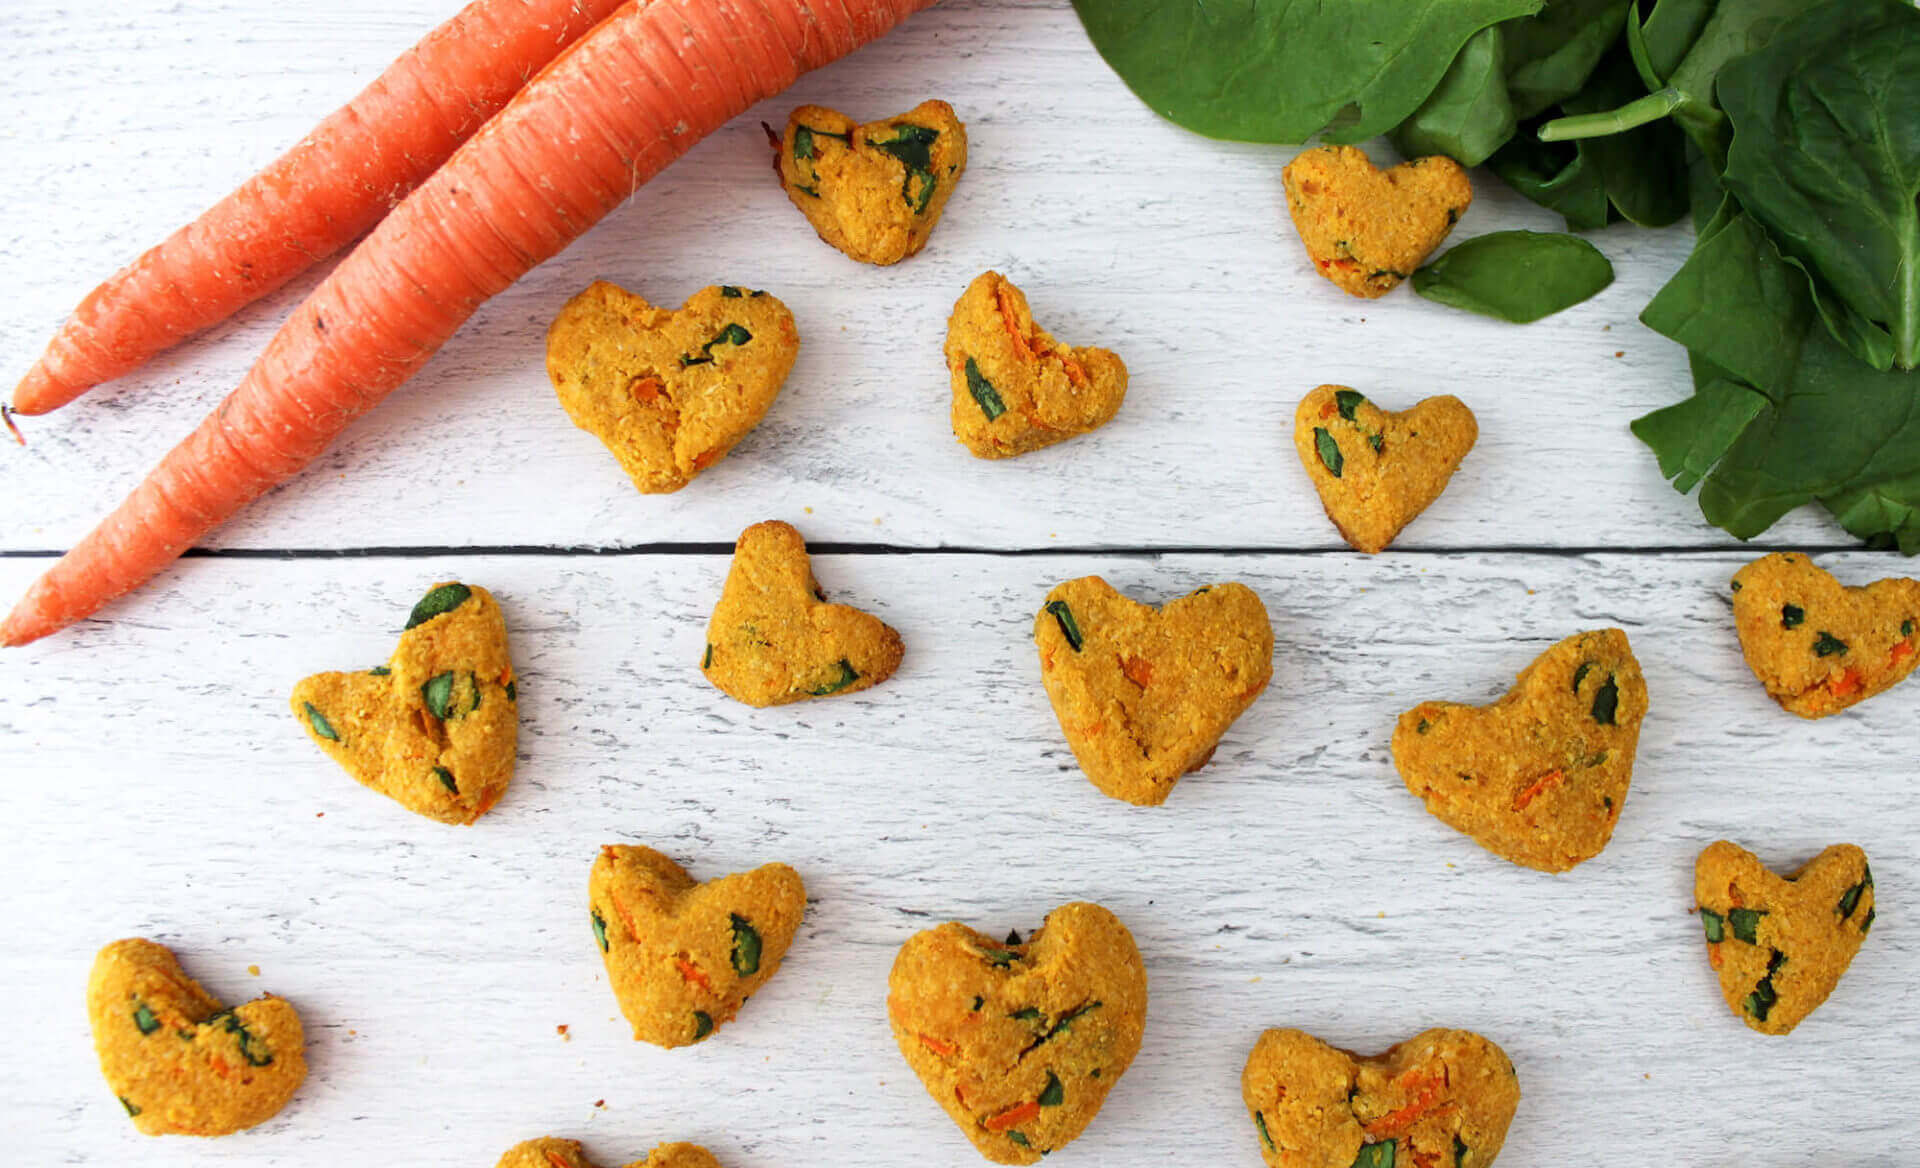 Grain-Free Carrot and Spinach Dog Treats